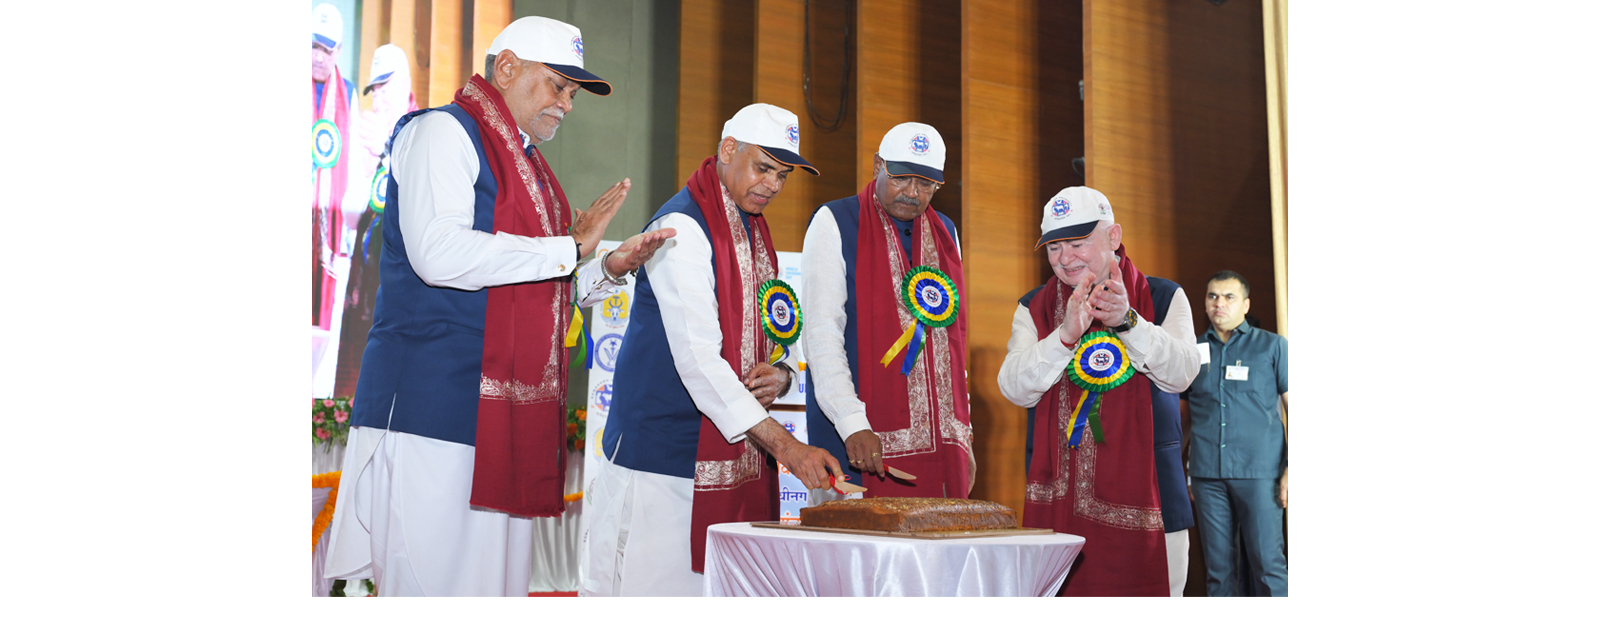 Celebration of International Year of Millets during 9th Annual Convocation of Kamdhenu University